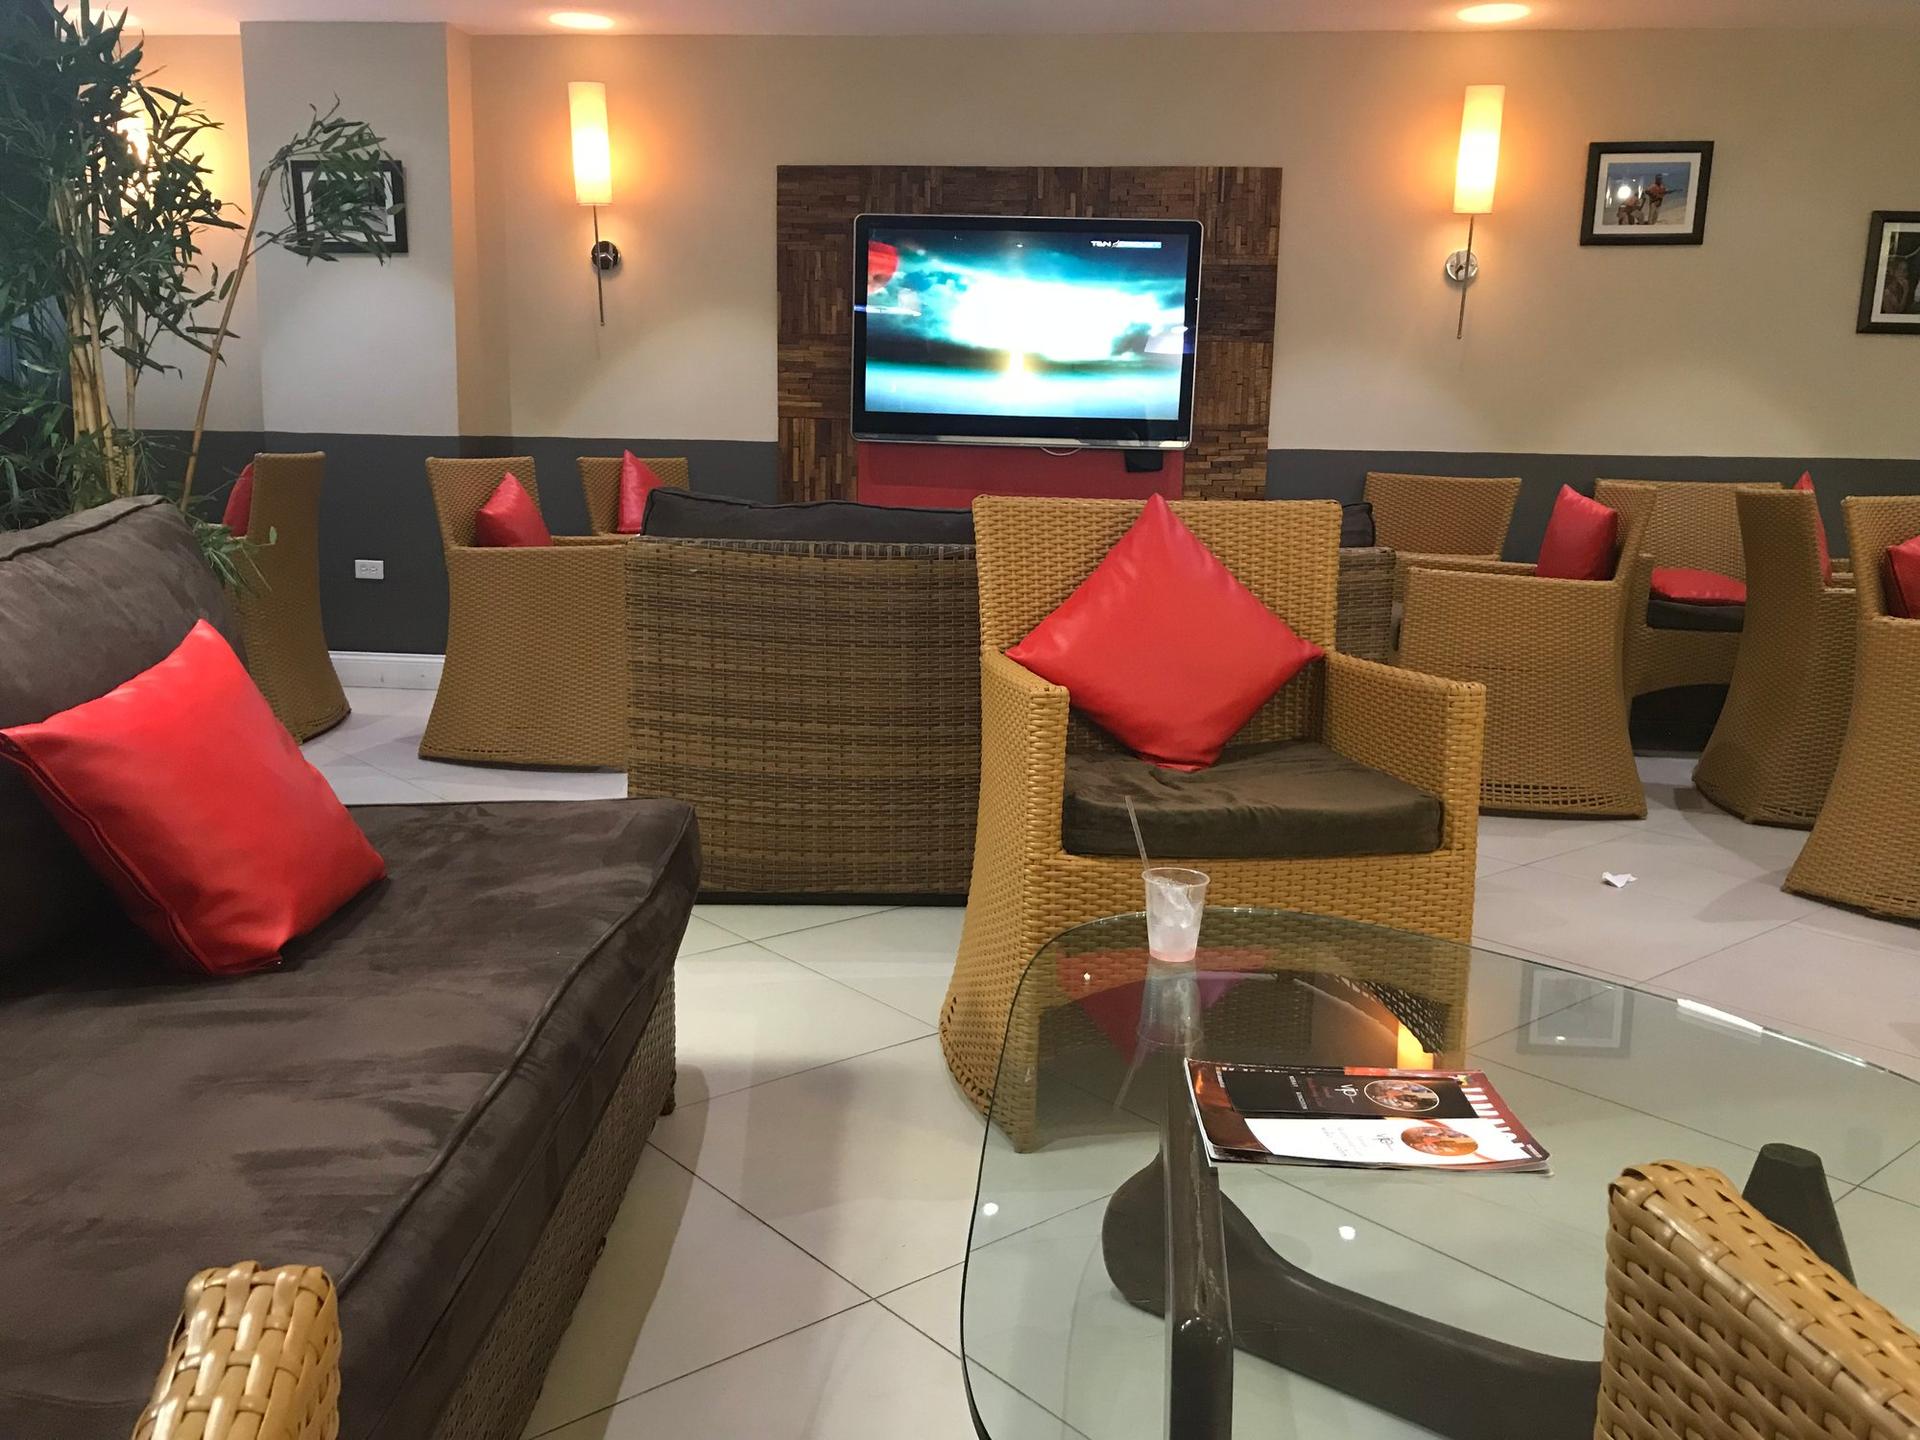 Club Mobay Arrivals Lounge image 5 of 17